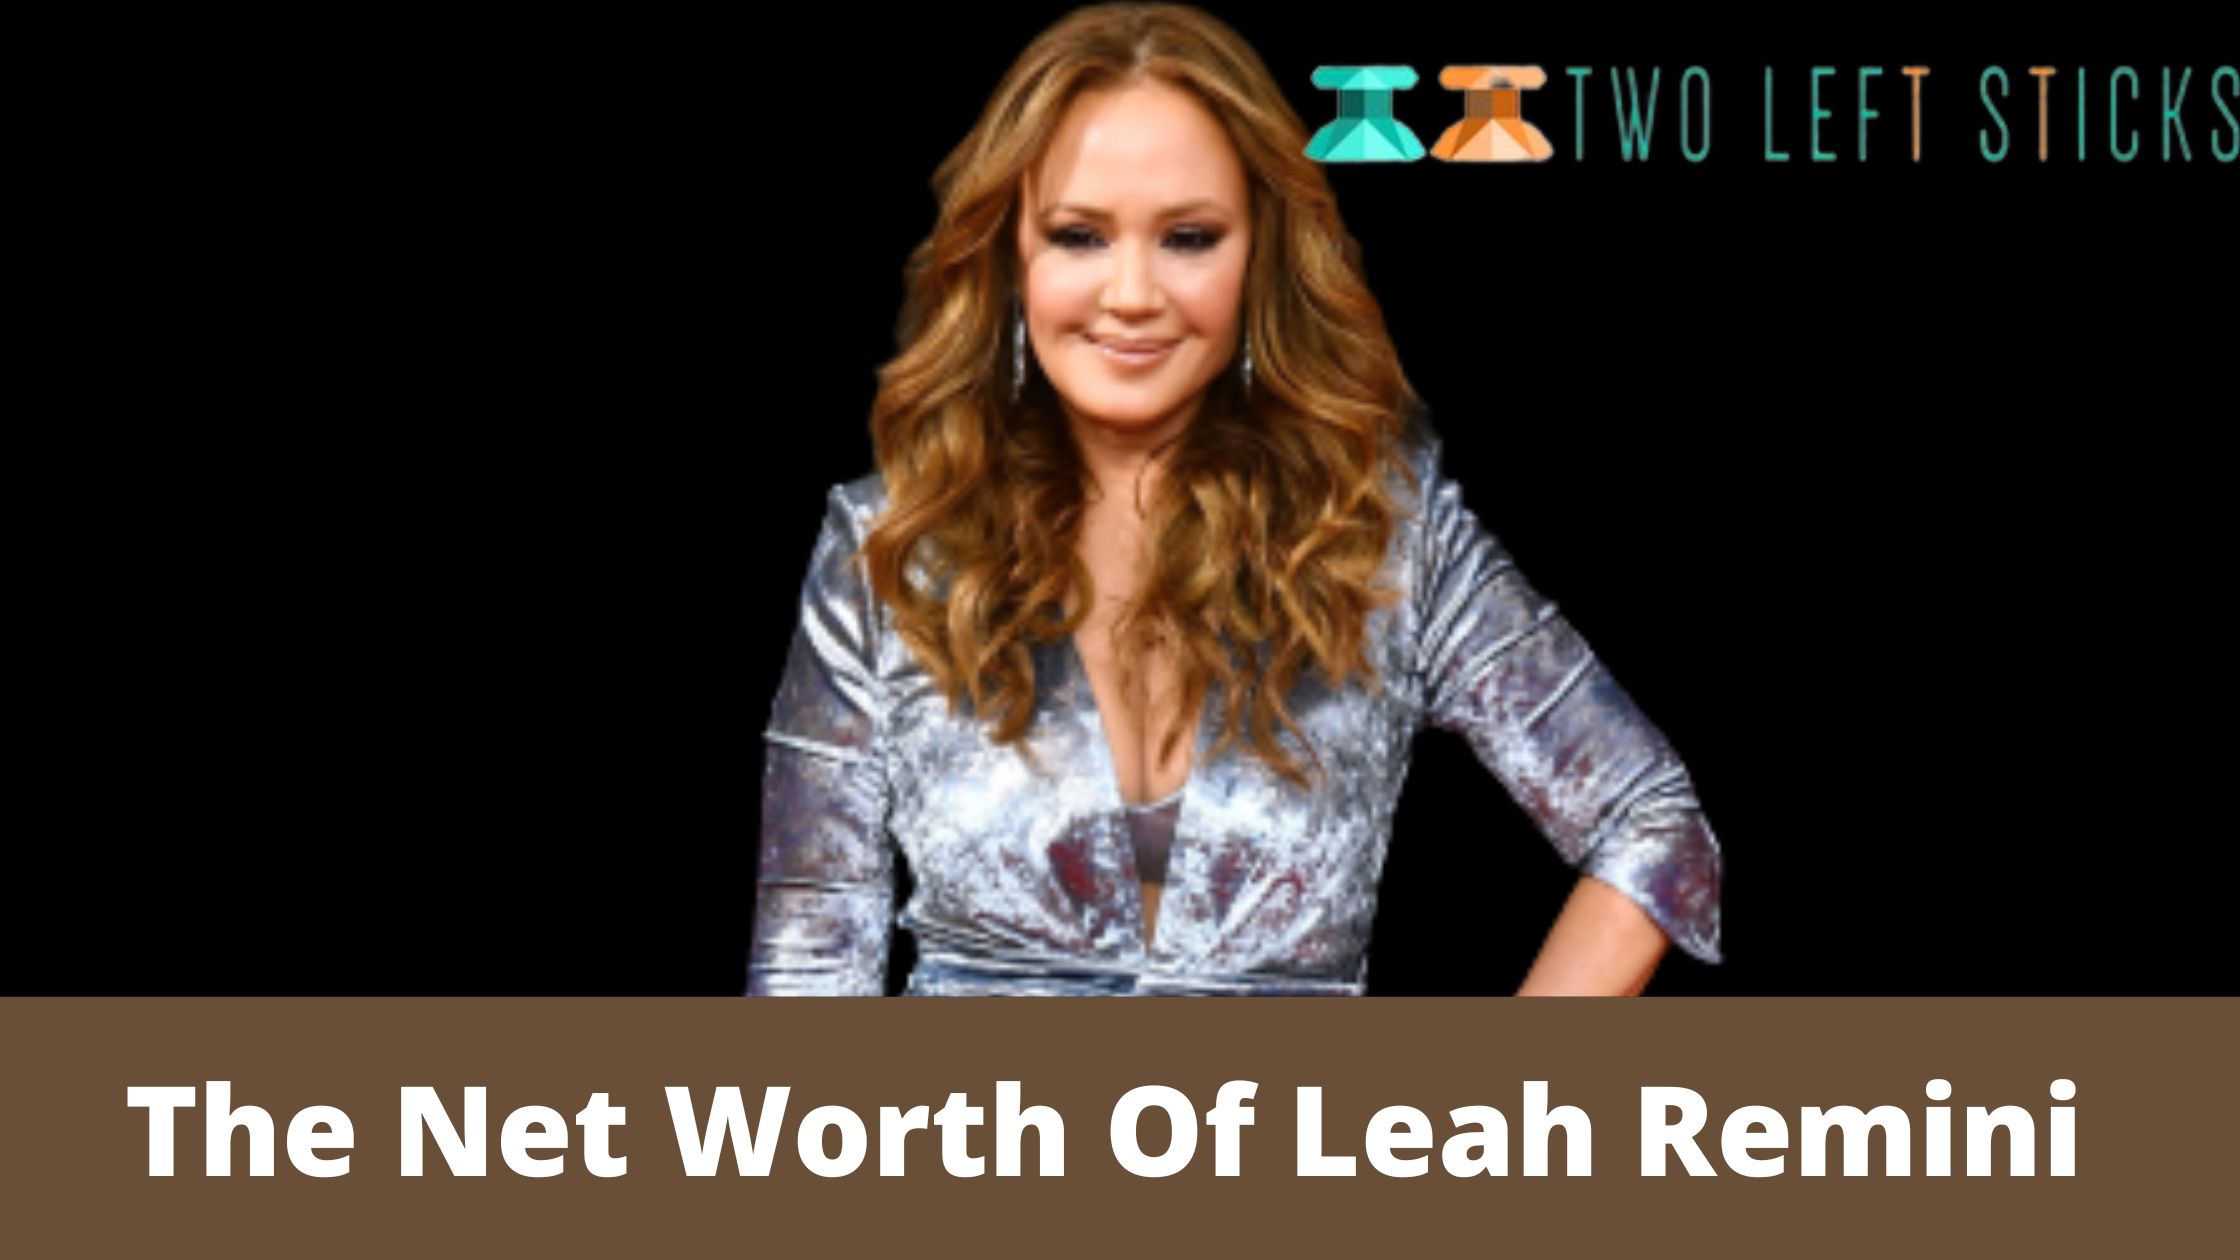 the-net-worth-of-leah-remini-twoleftsticks(1)